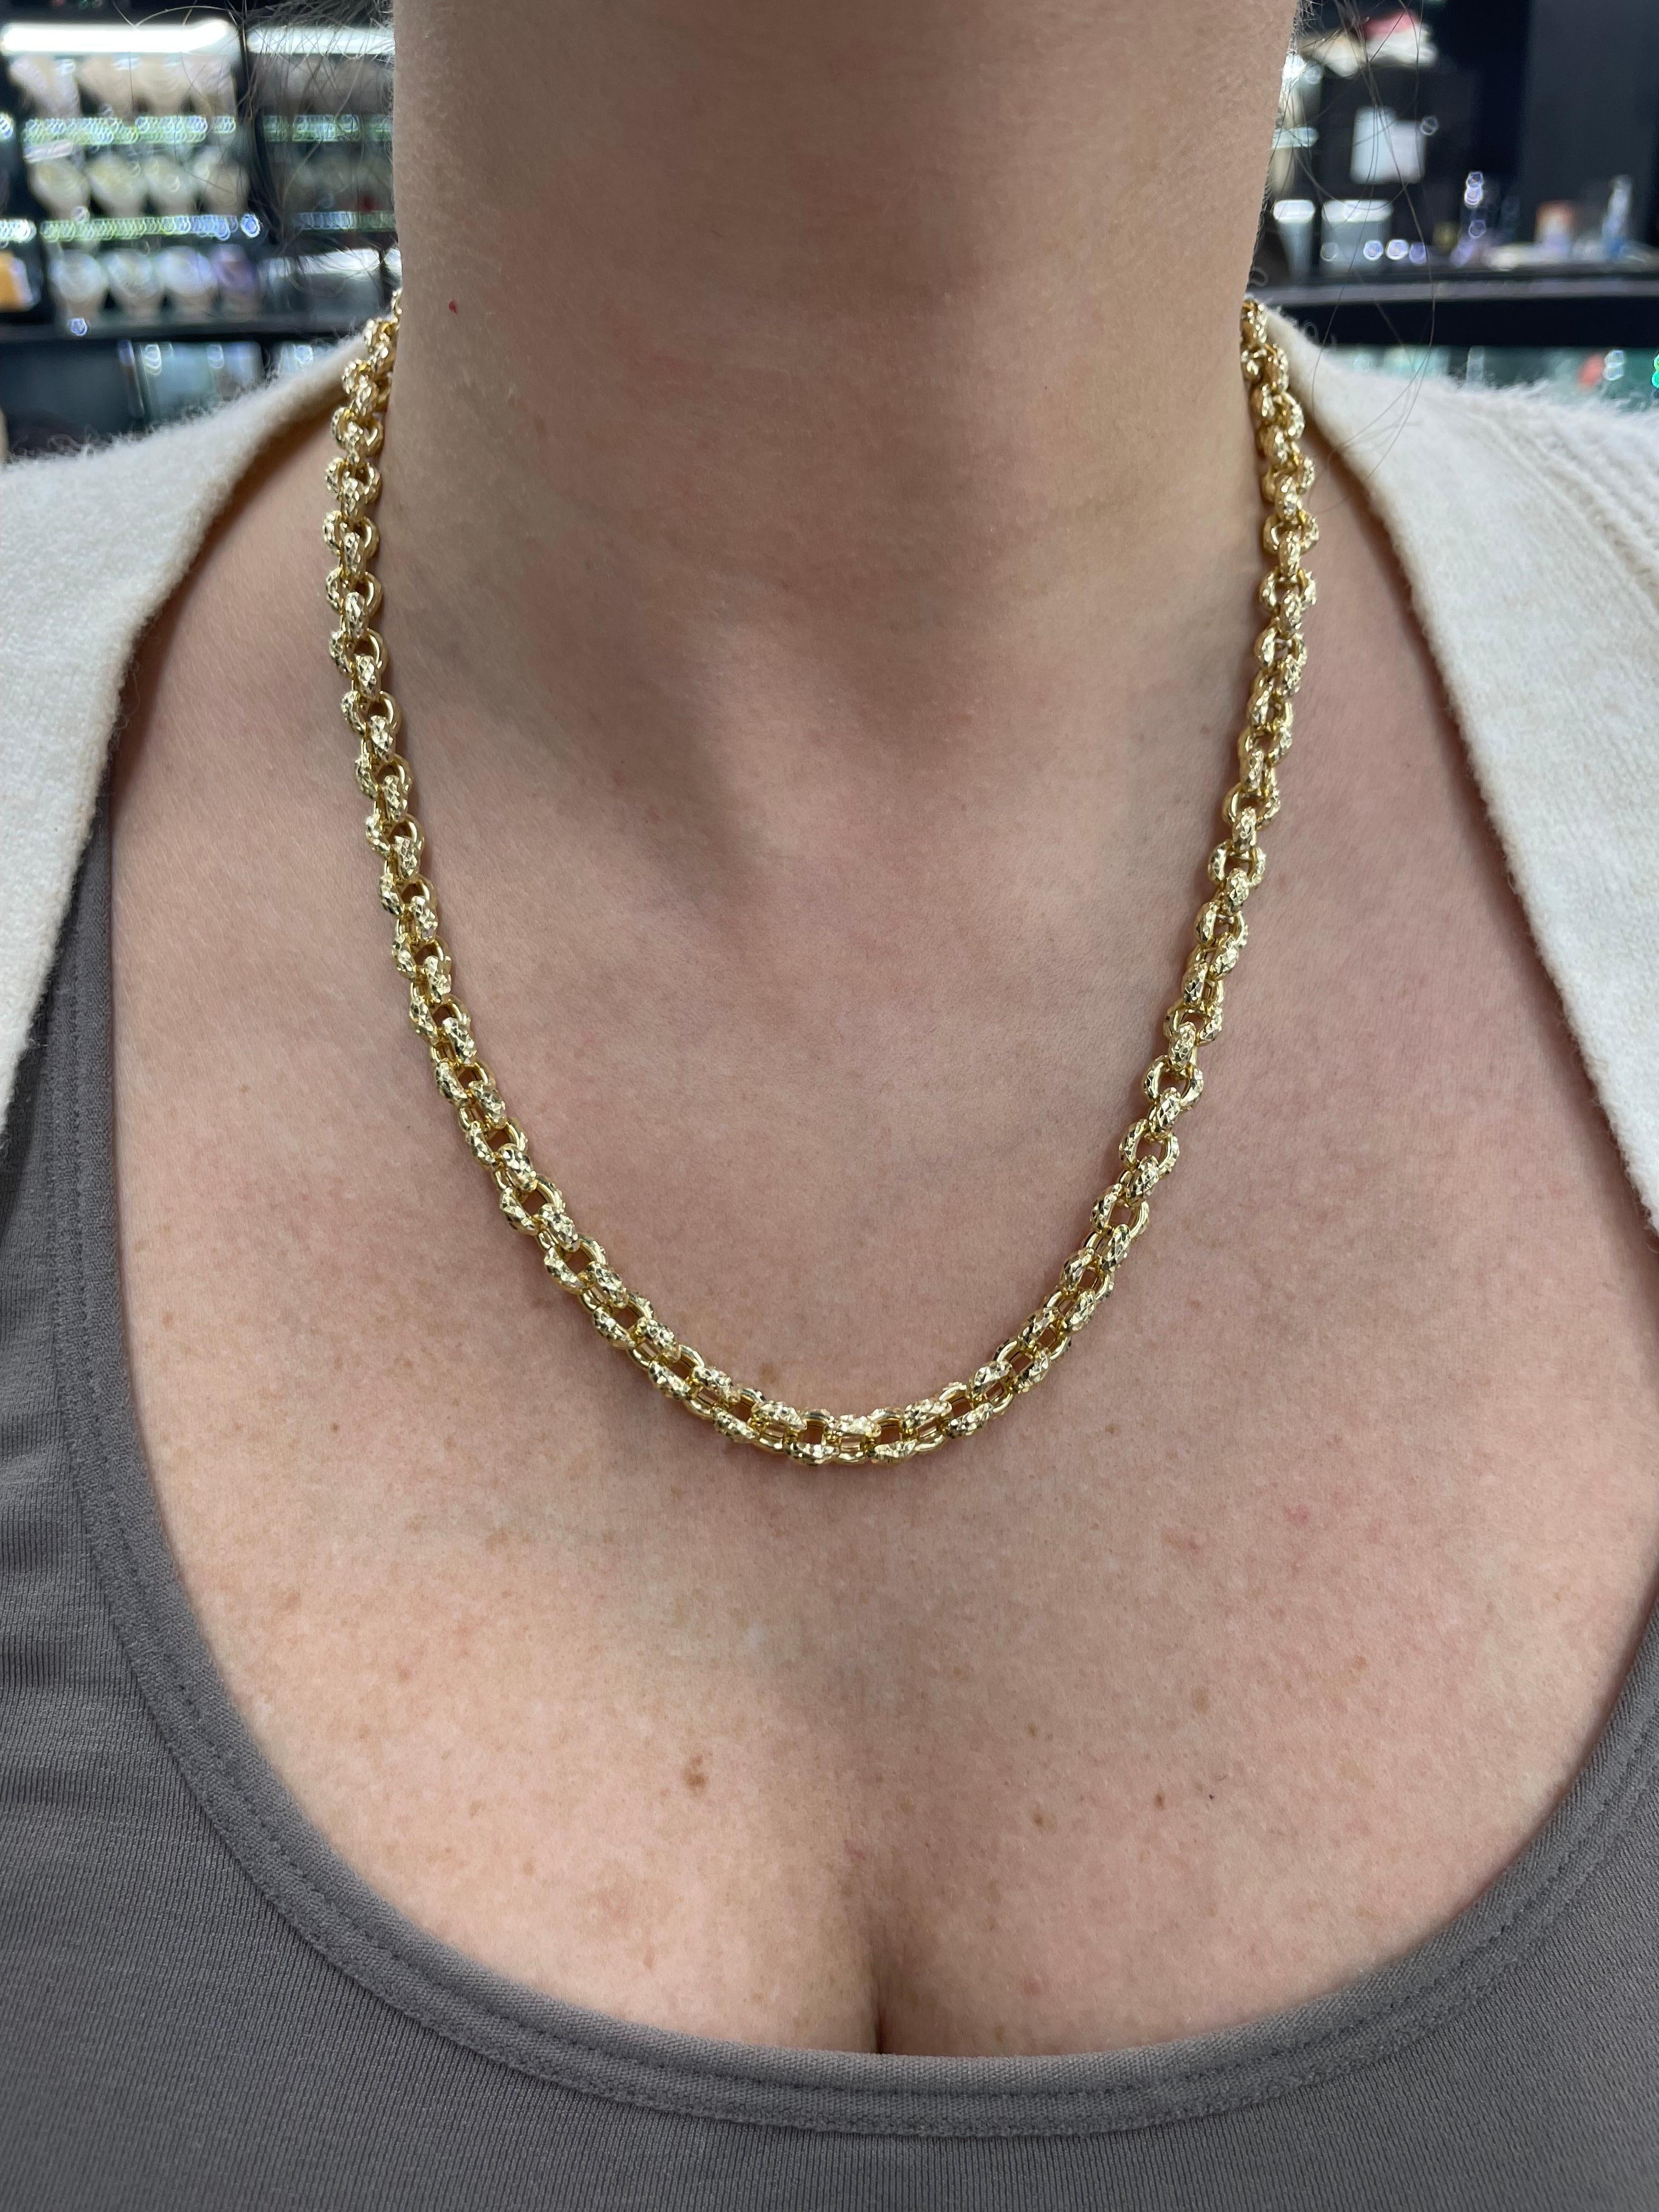 14 Karat Yellow Gold Hammered Link Necklace 31.24 Grams For Sale 3